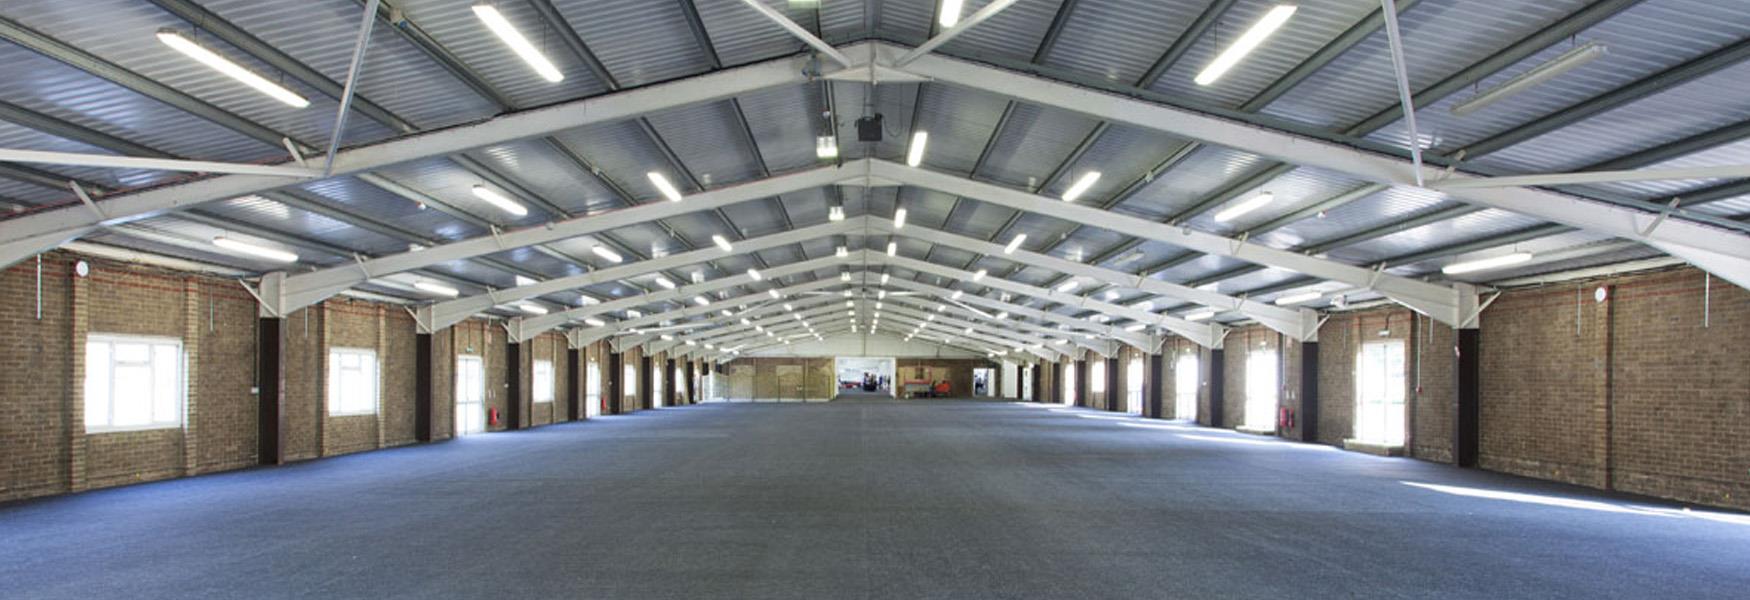 Large Exhibition Hall